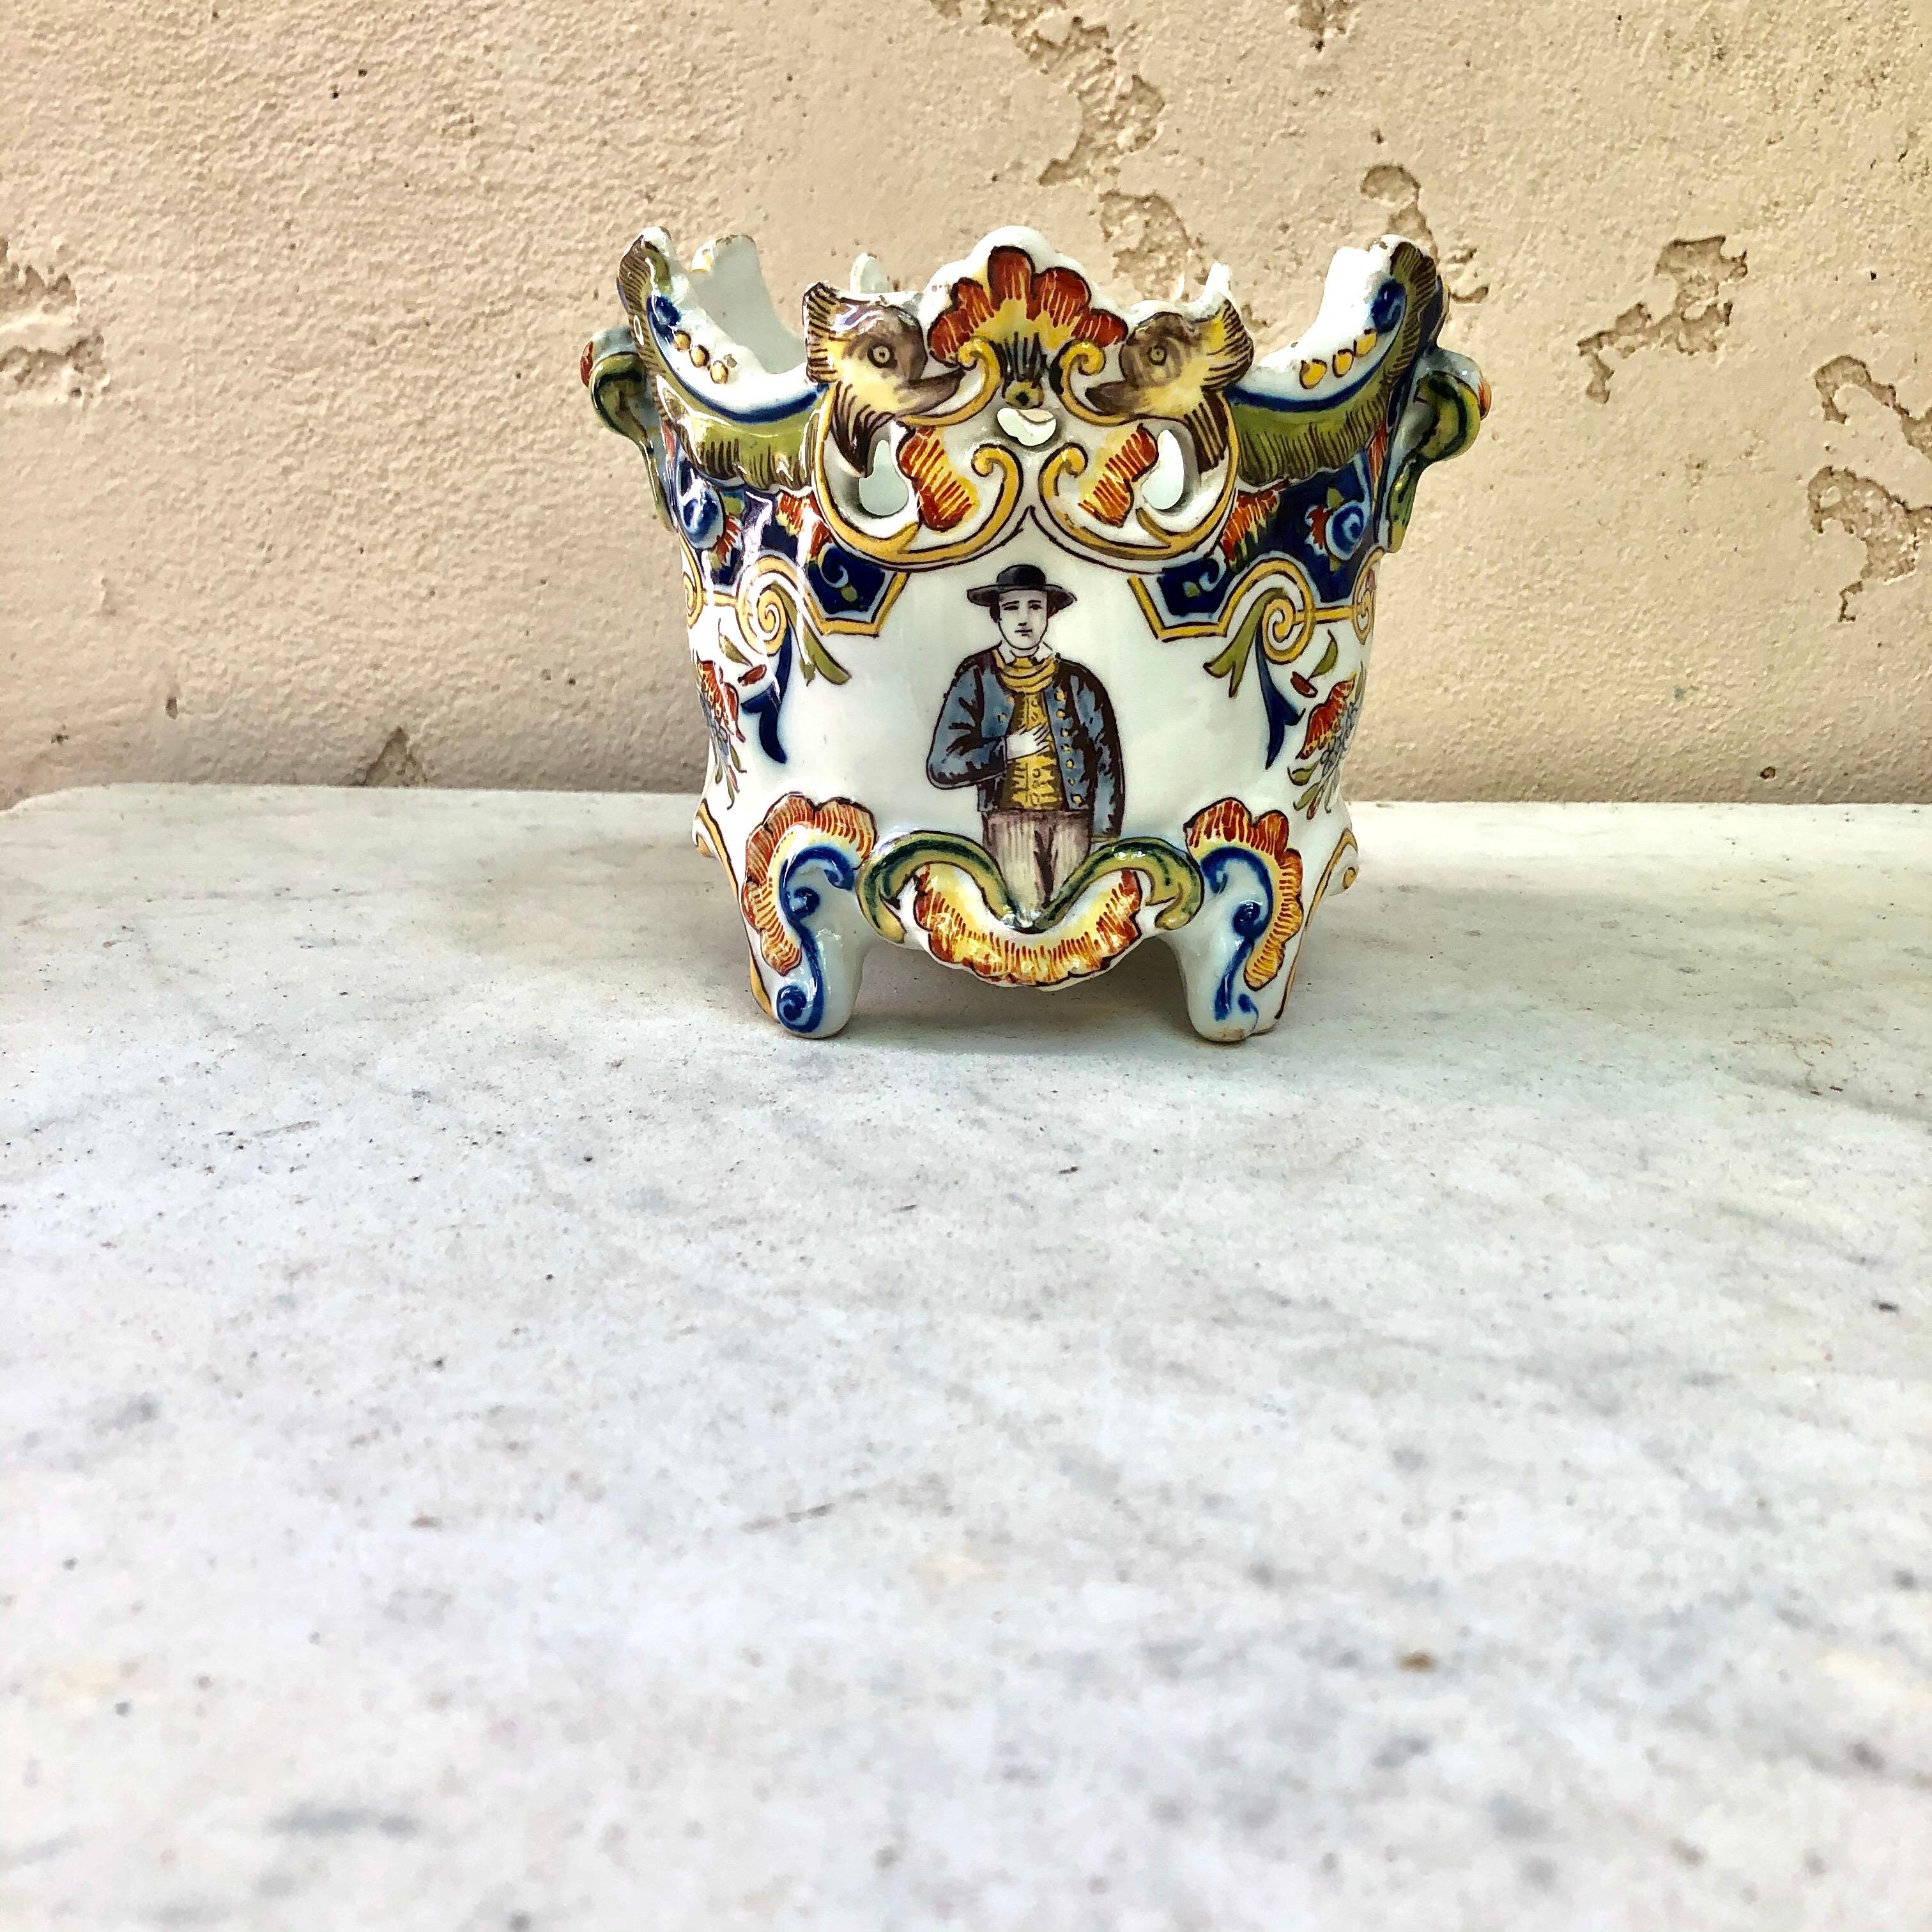 French Desvres faience jardinière cachepot painted with flowers, coat of arms and a farmer, circa 1900.